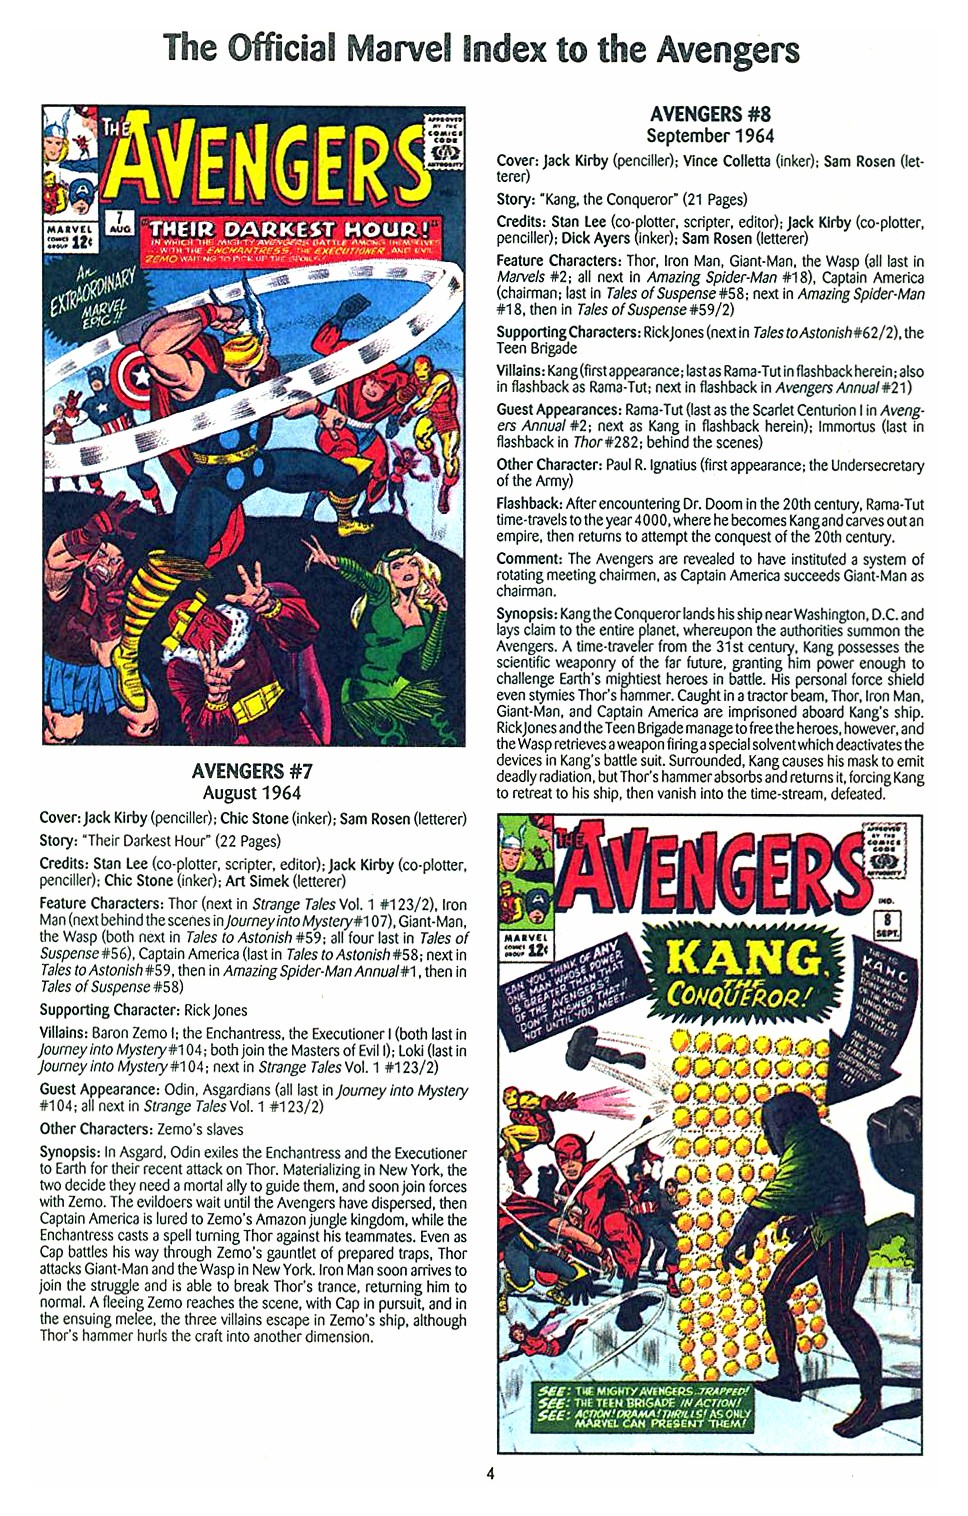 Read online The Official Marvel Index to the Avengers comic -  Issue #1 - 6